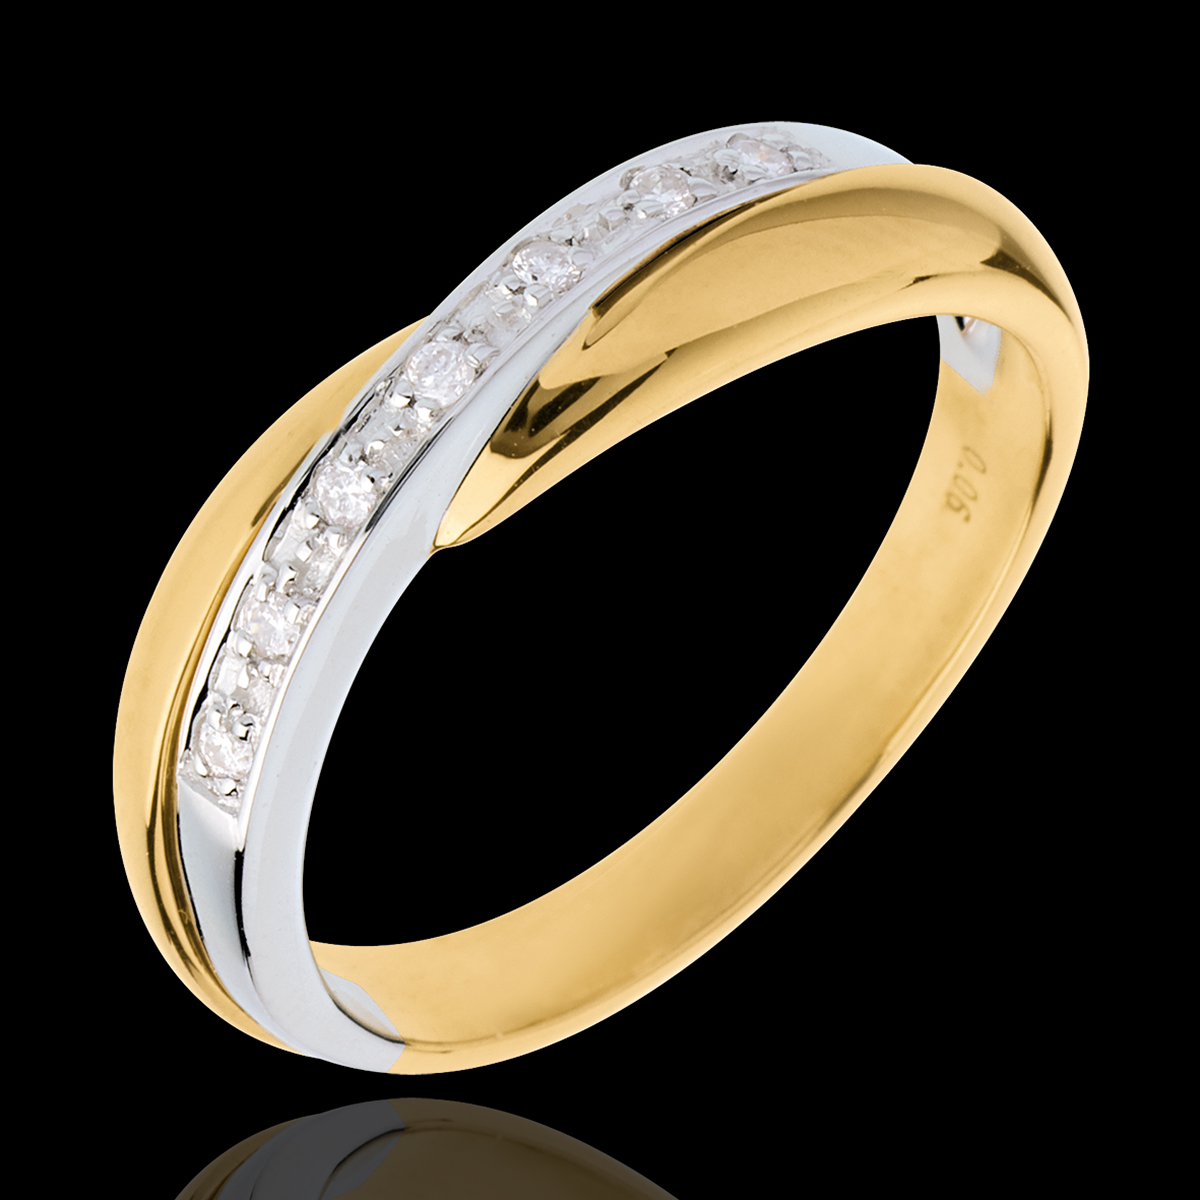 Get White And Yellow Gold Wedding Bands Pics - pricesmattresscoverszippered